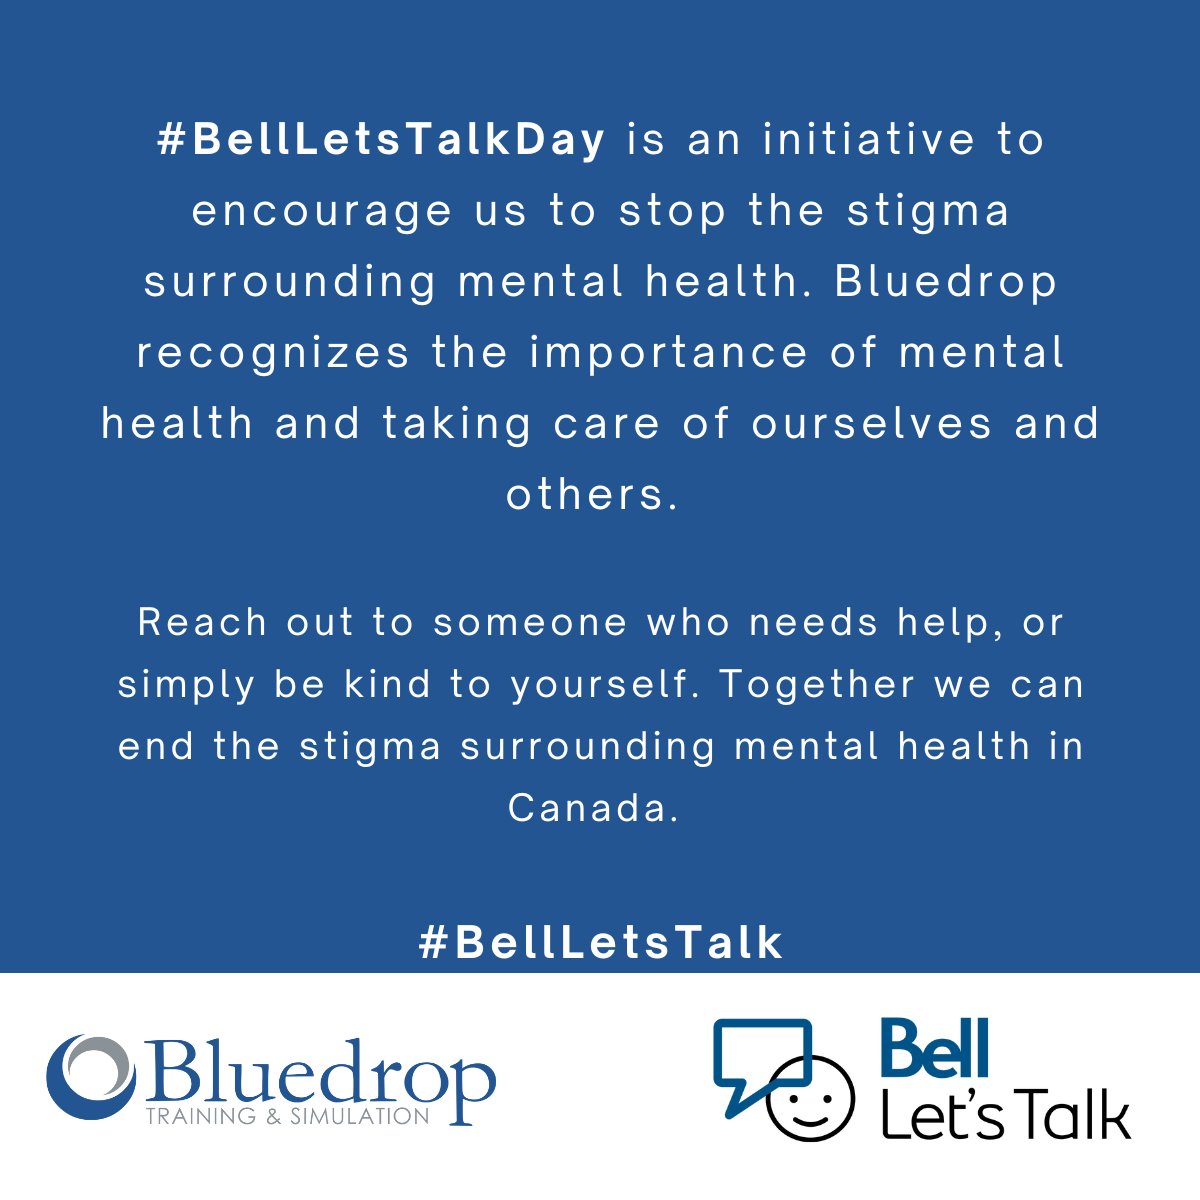 Today is #BellLetsTalkDay. Let's end the stigma against mental illness together. For more information and to find out how you can get involved visit: letstalk.bell.ca